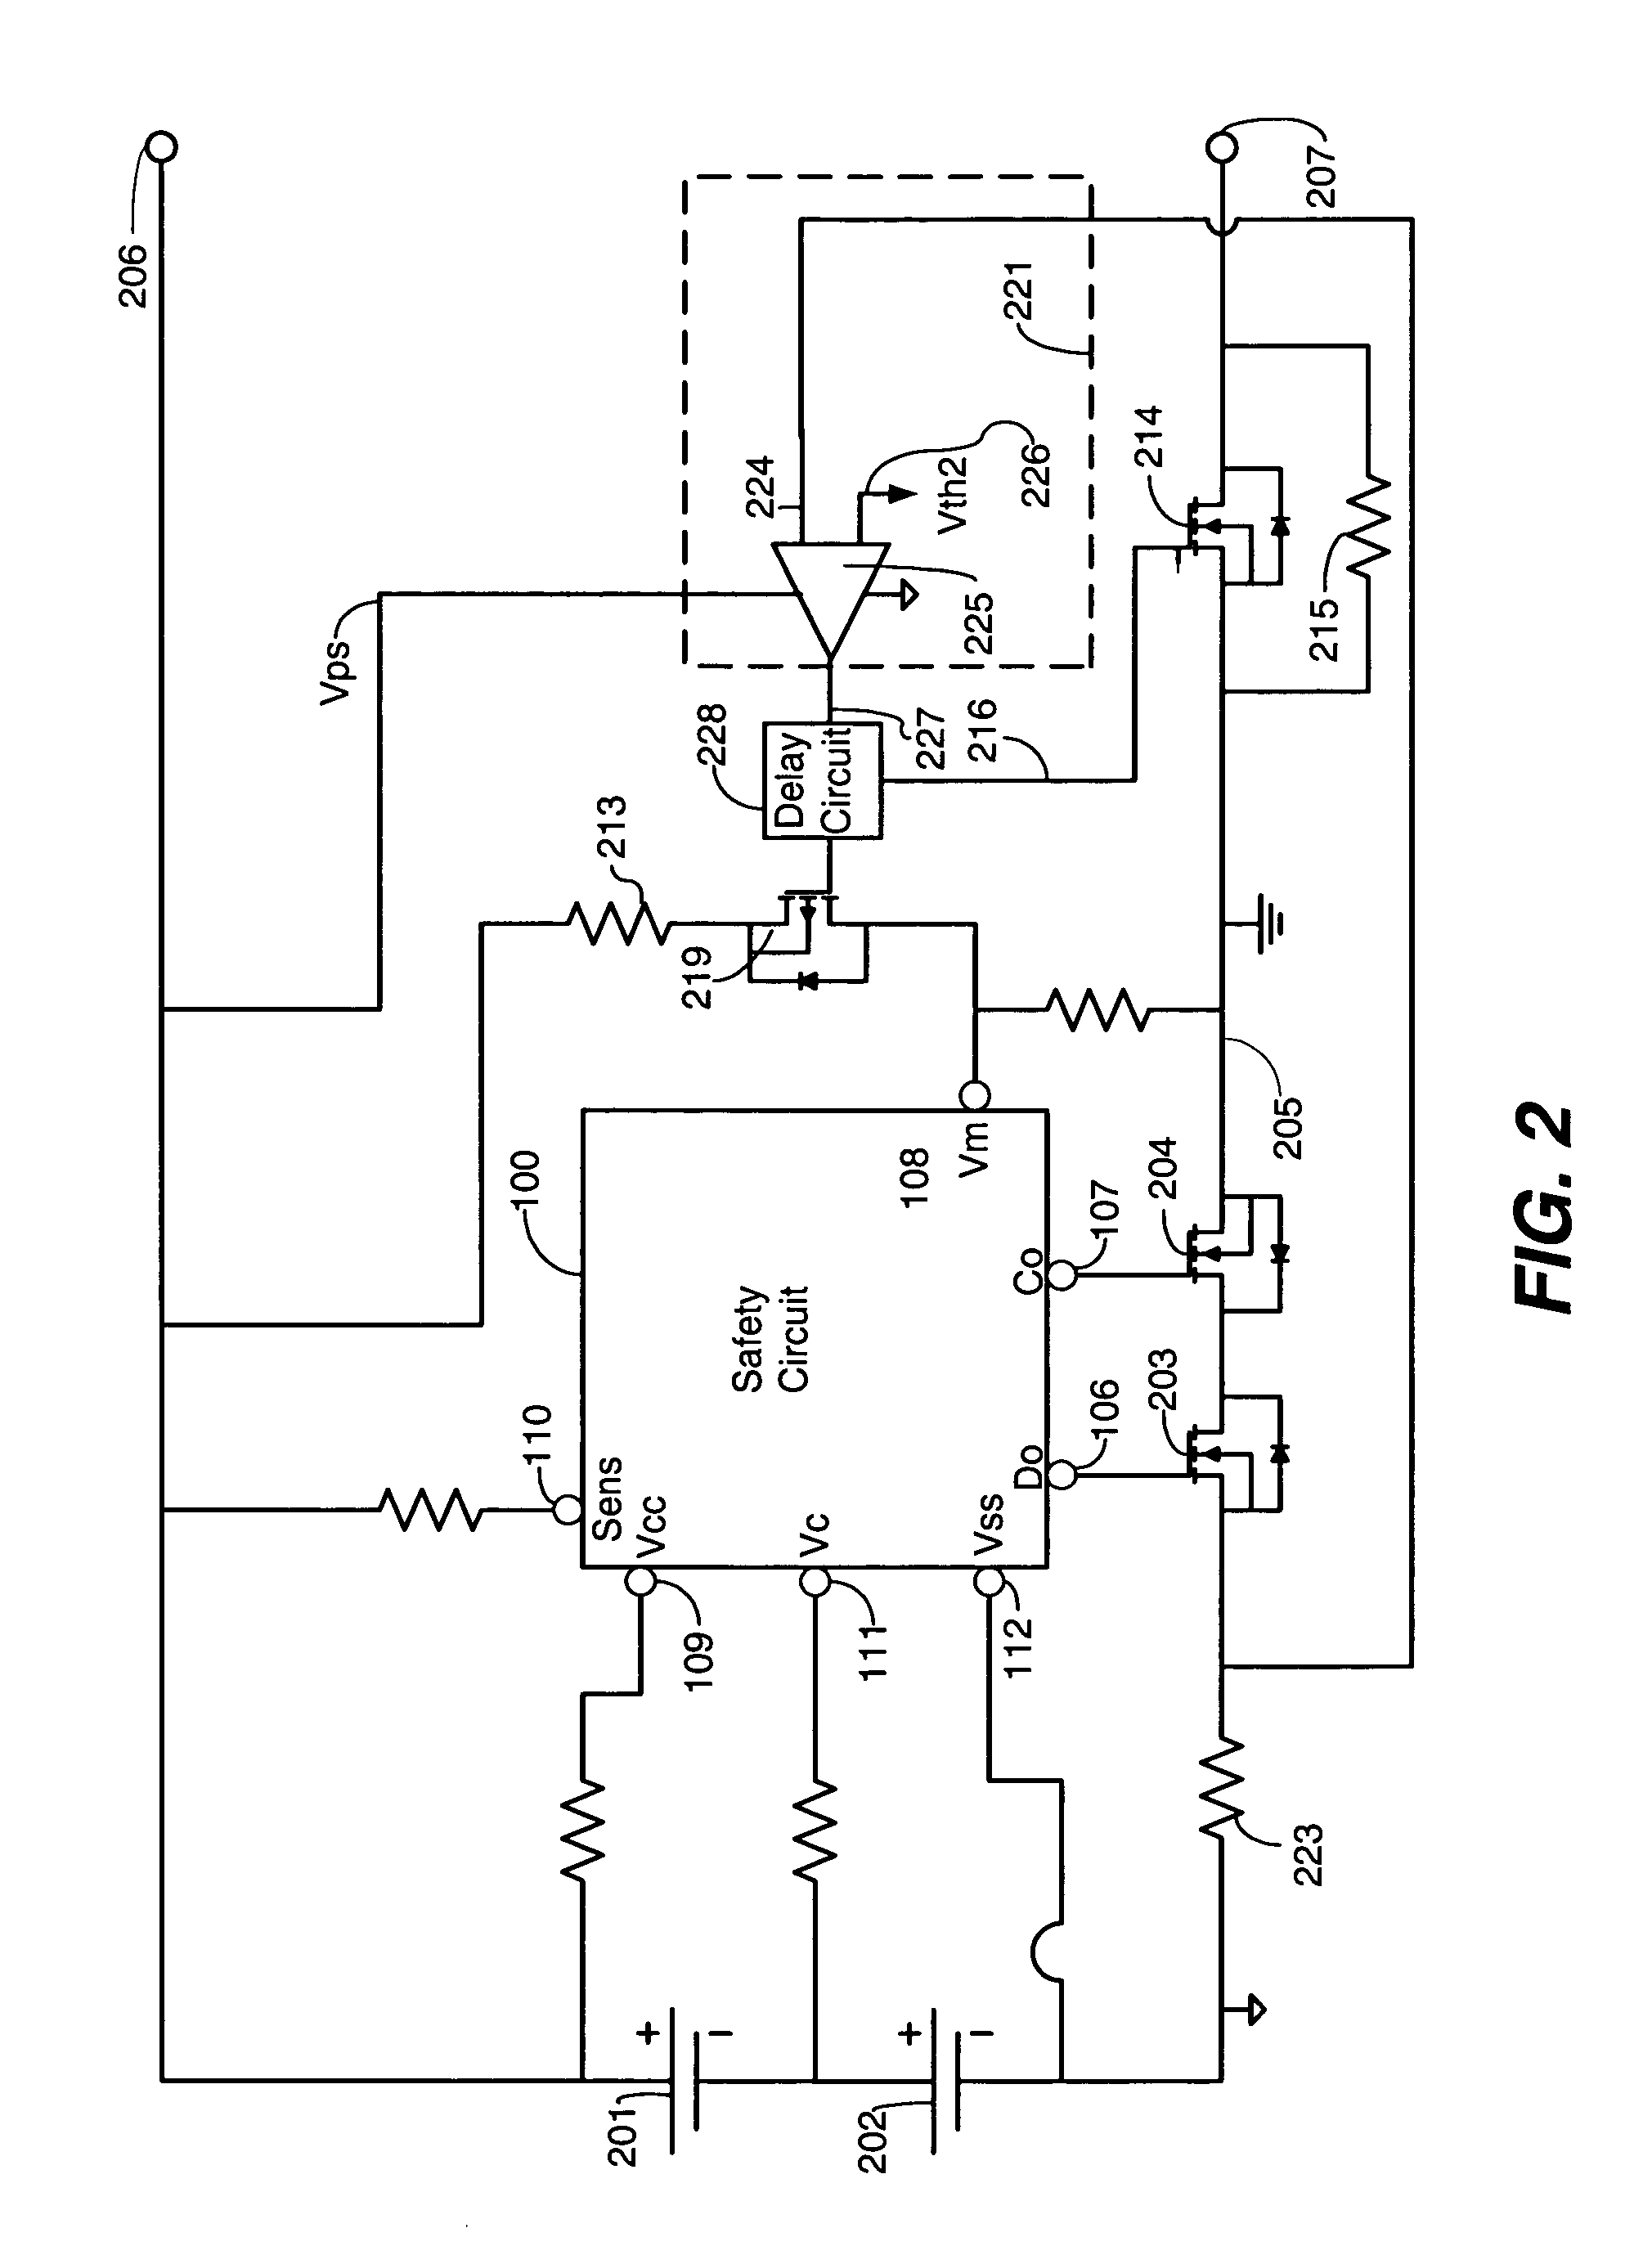 Battery protection circuit for simulating an overcurrent condition based on battery current flow